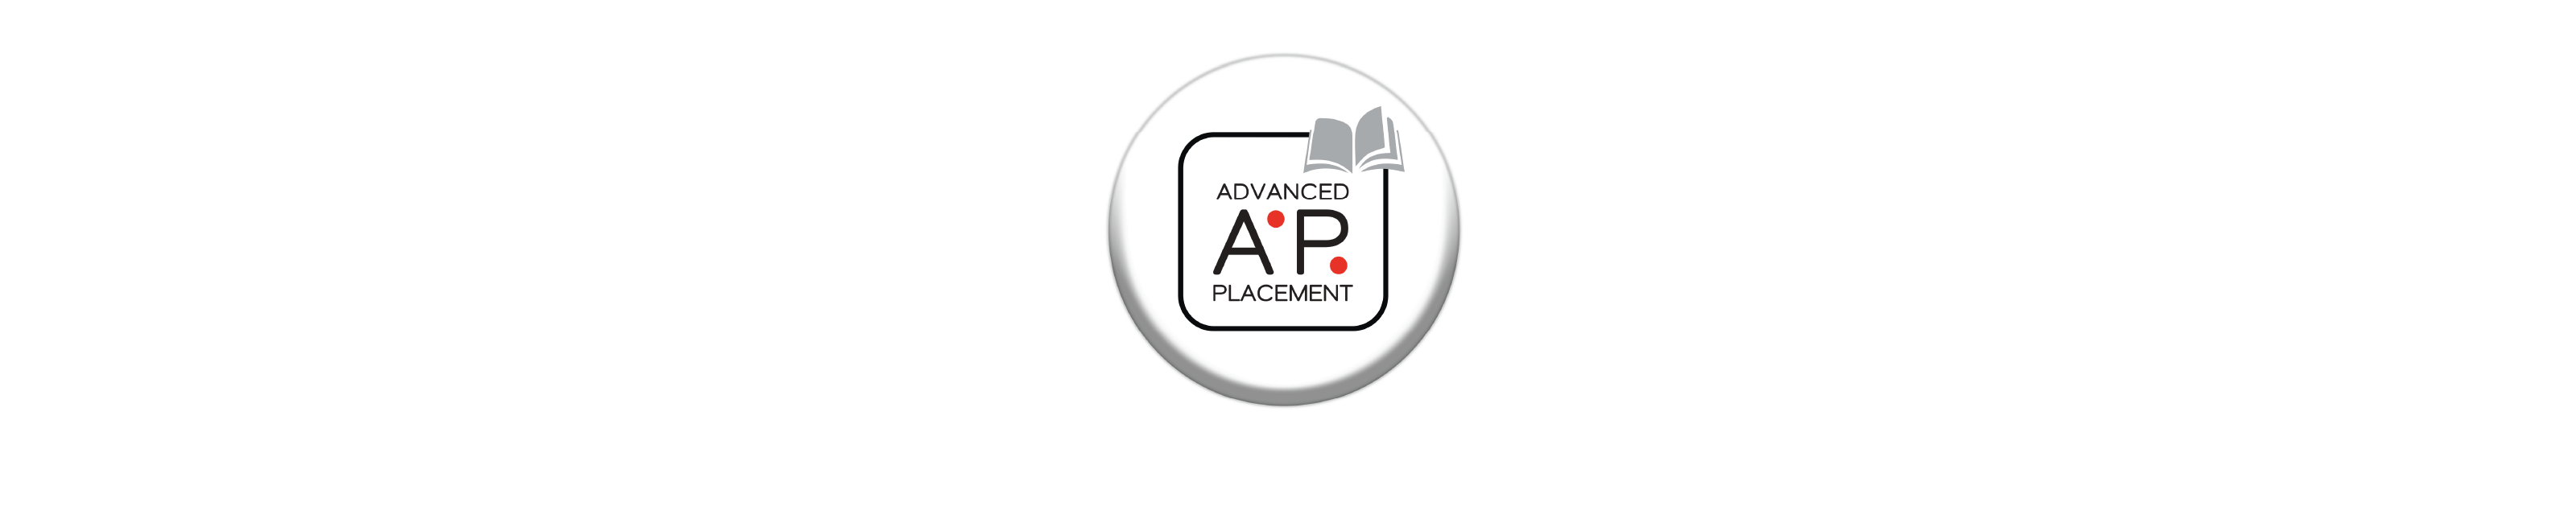 A while round logo with Advanced Placement (AP) written on it. There is an illustration of a book near the top right corner. 